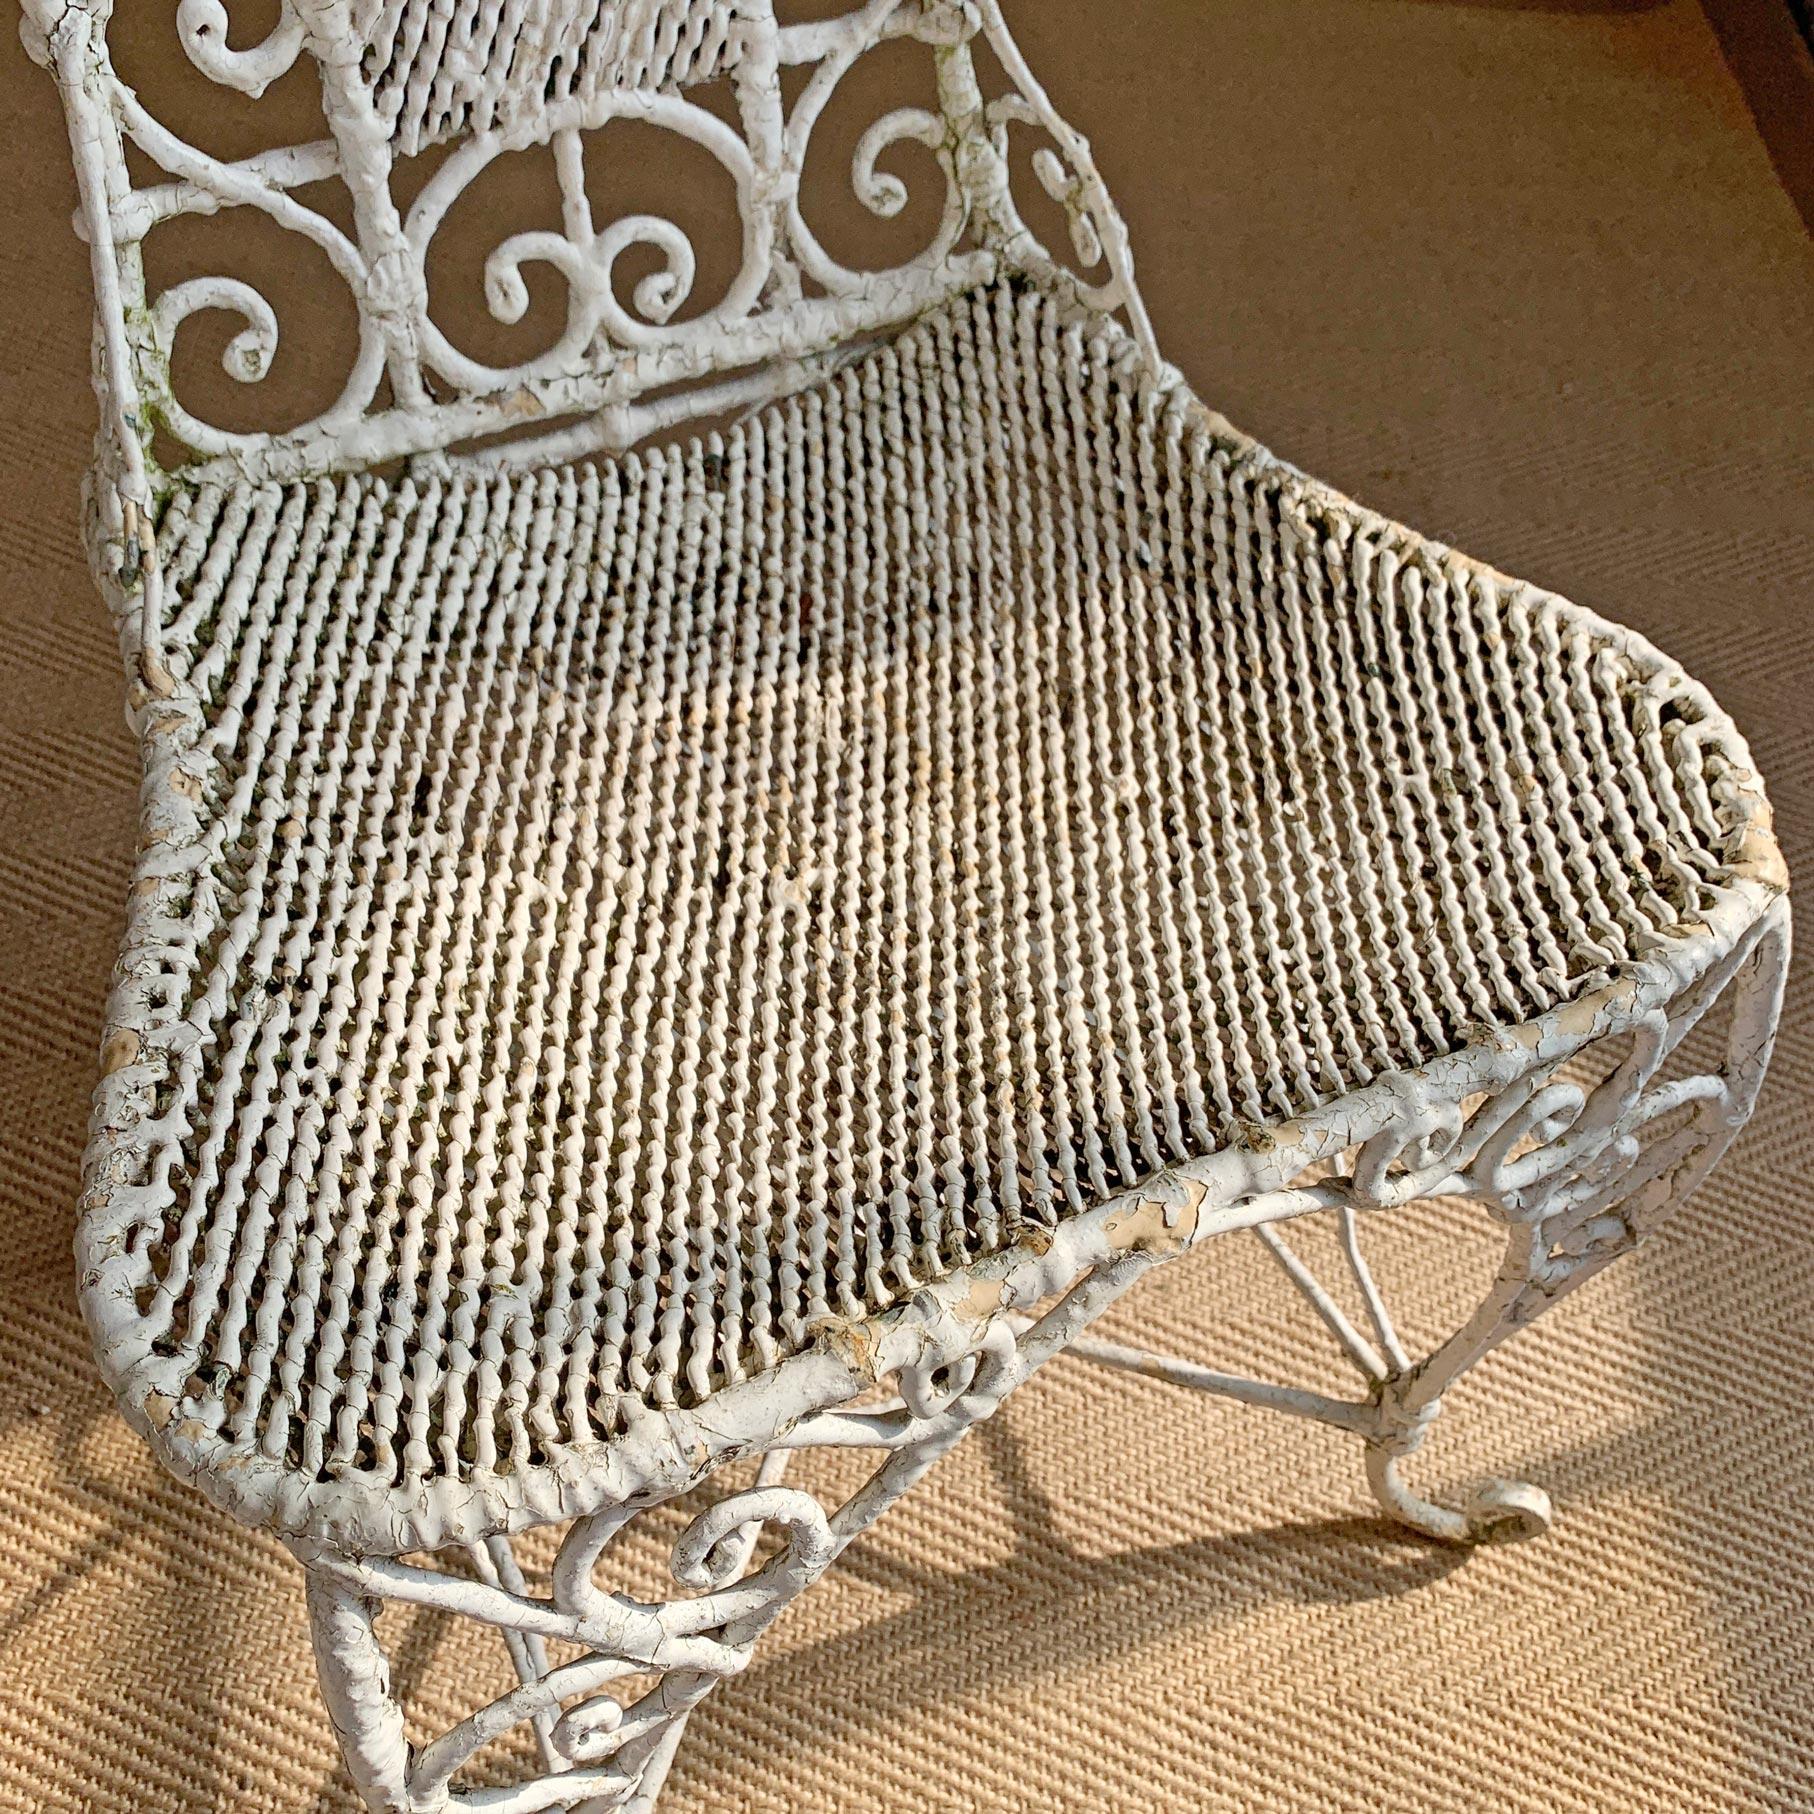 Early 19th Century Ornate Regency White Wirework Iron Chair For Sale